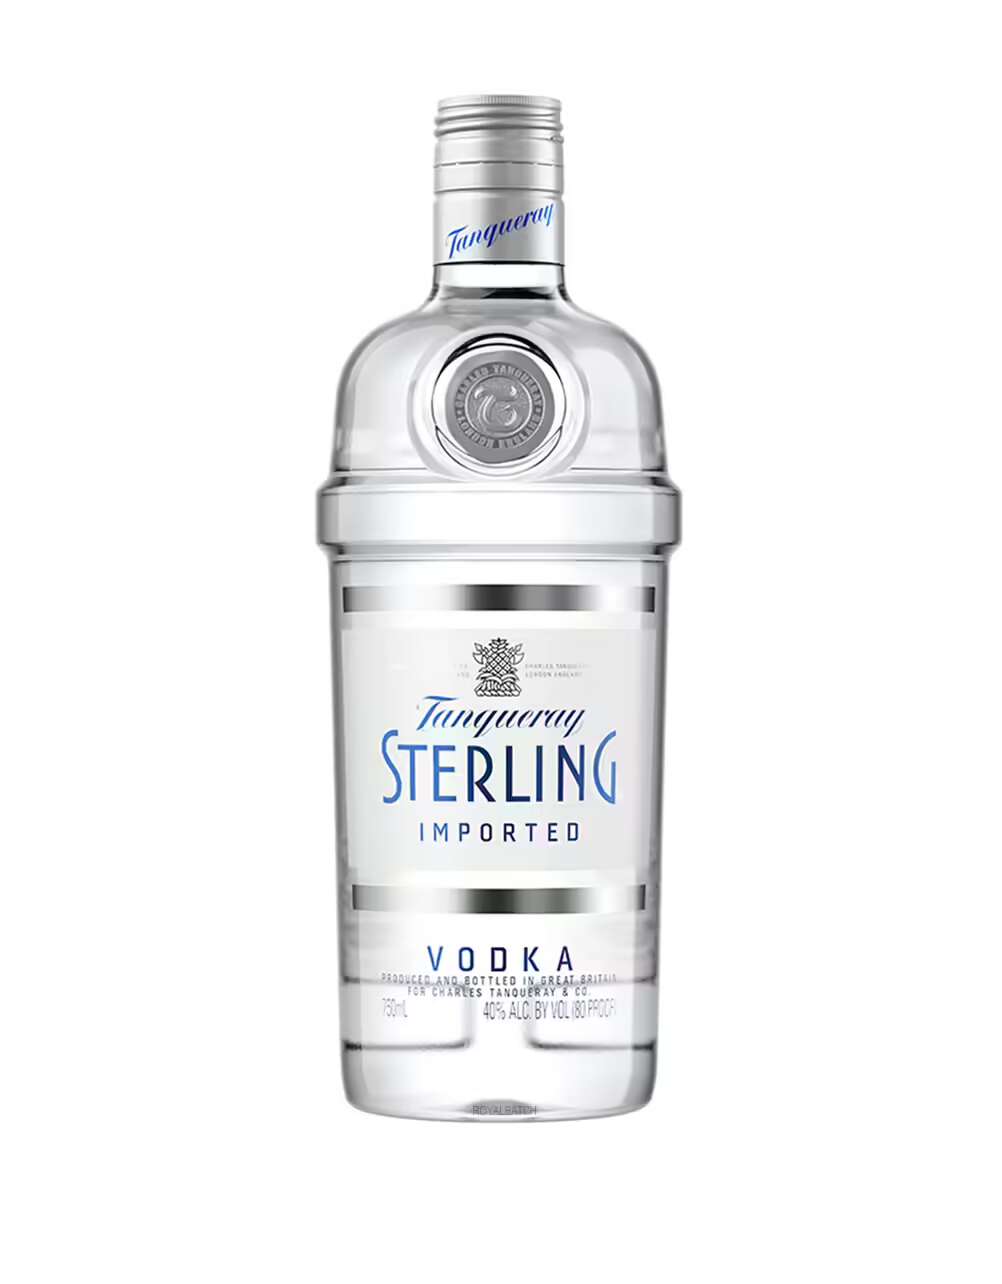 Tanqueray Sterling Imported Vodka